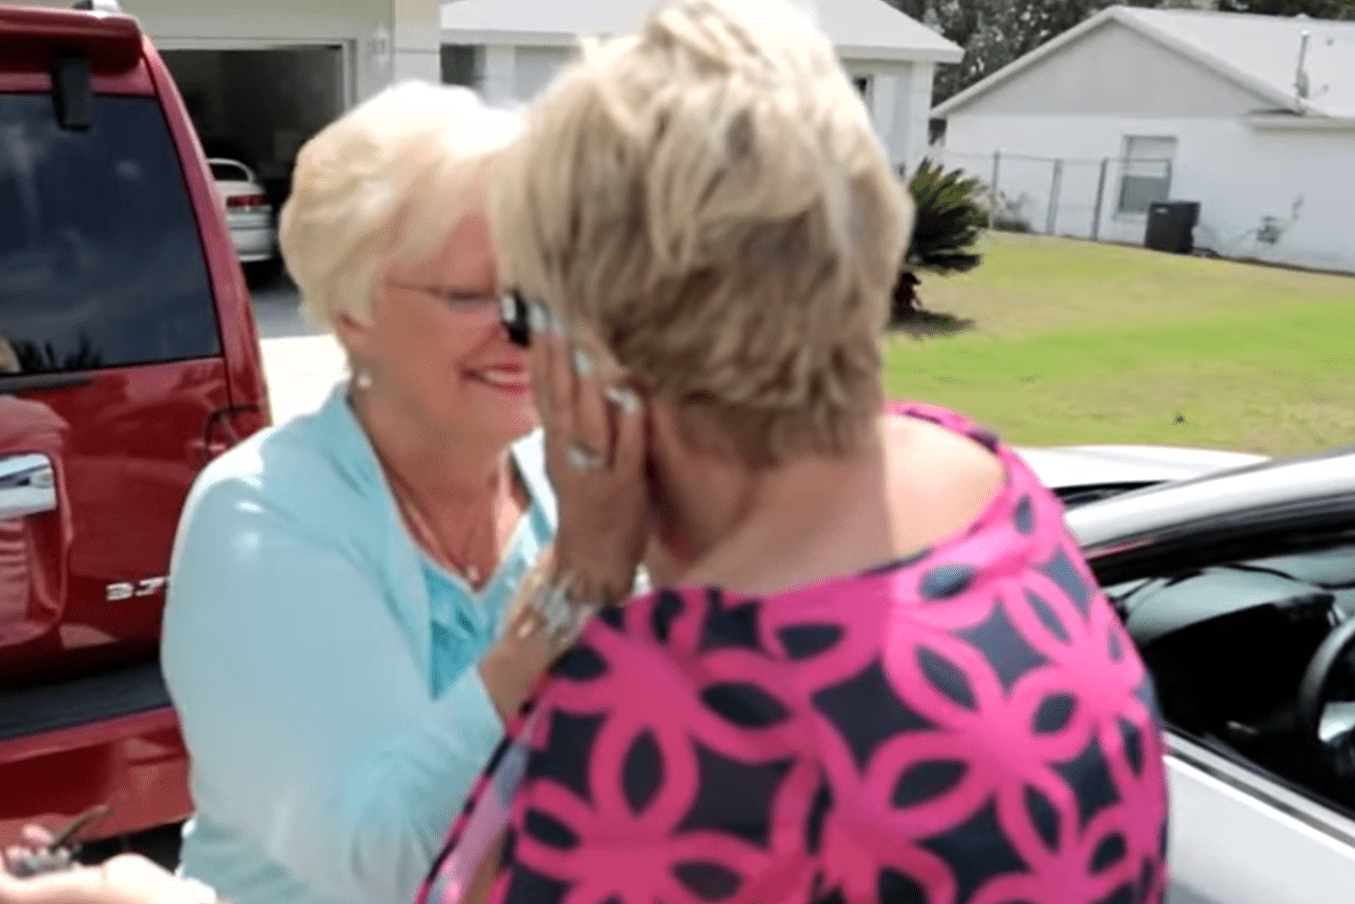 Christine Shirley holding Teresa Stinson’s face in her hands and looking at her lovingly.┃Source: youtube.com/ABCNews